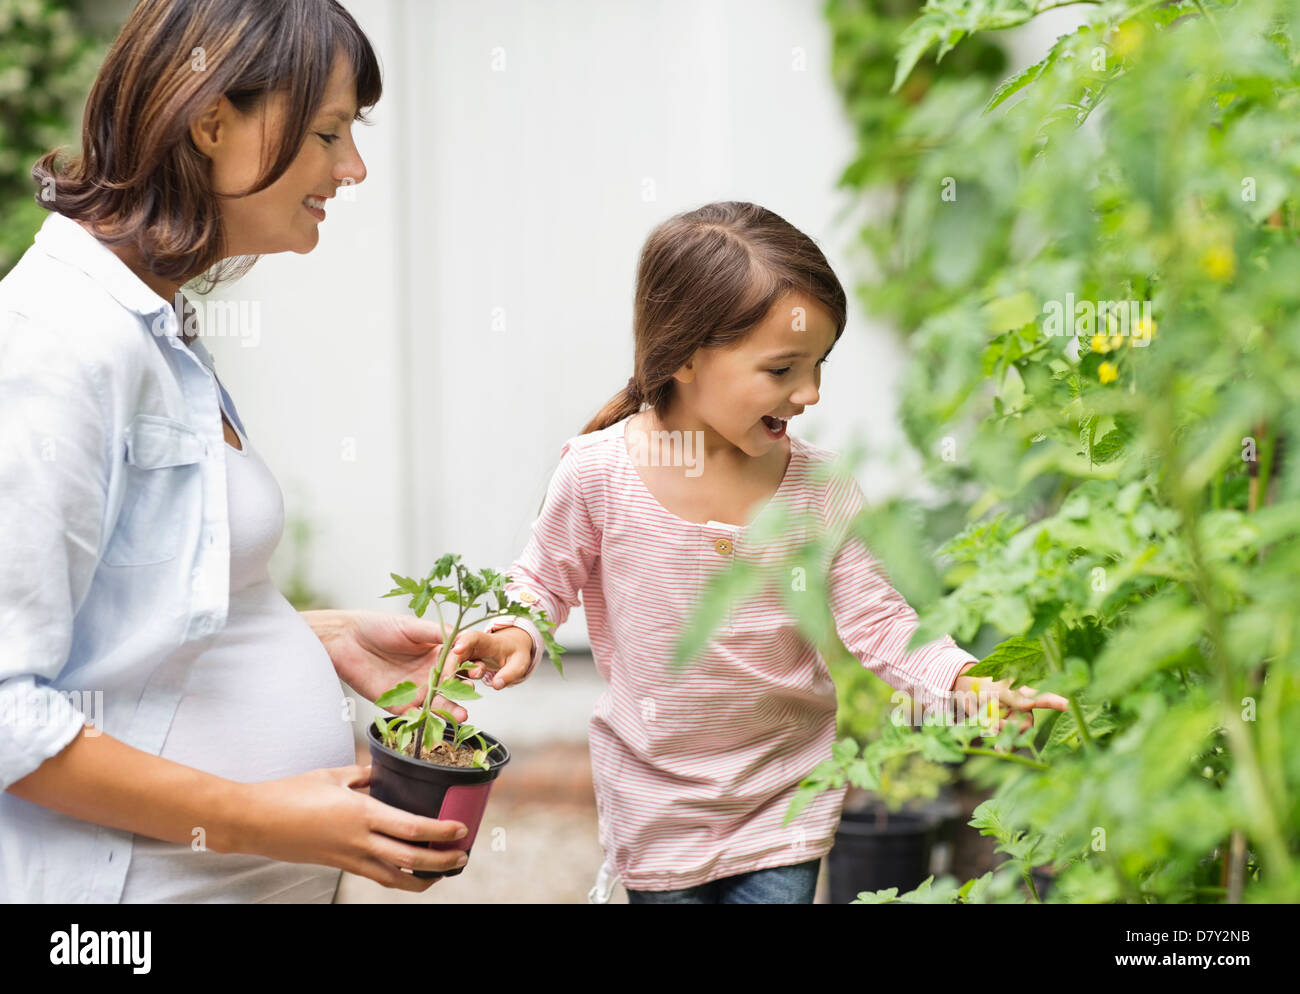 Pregnant mother and daughter gardening together Stock Photo